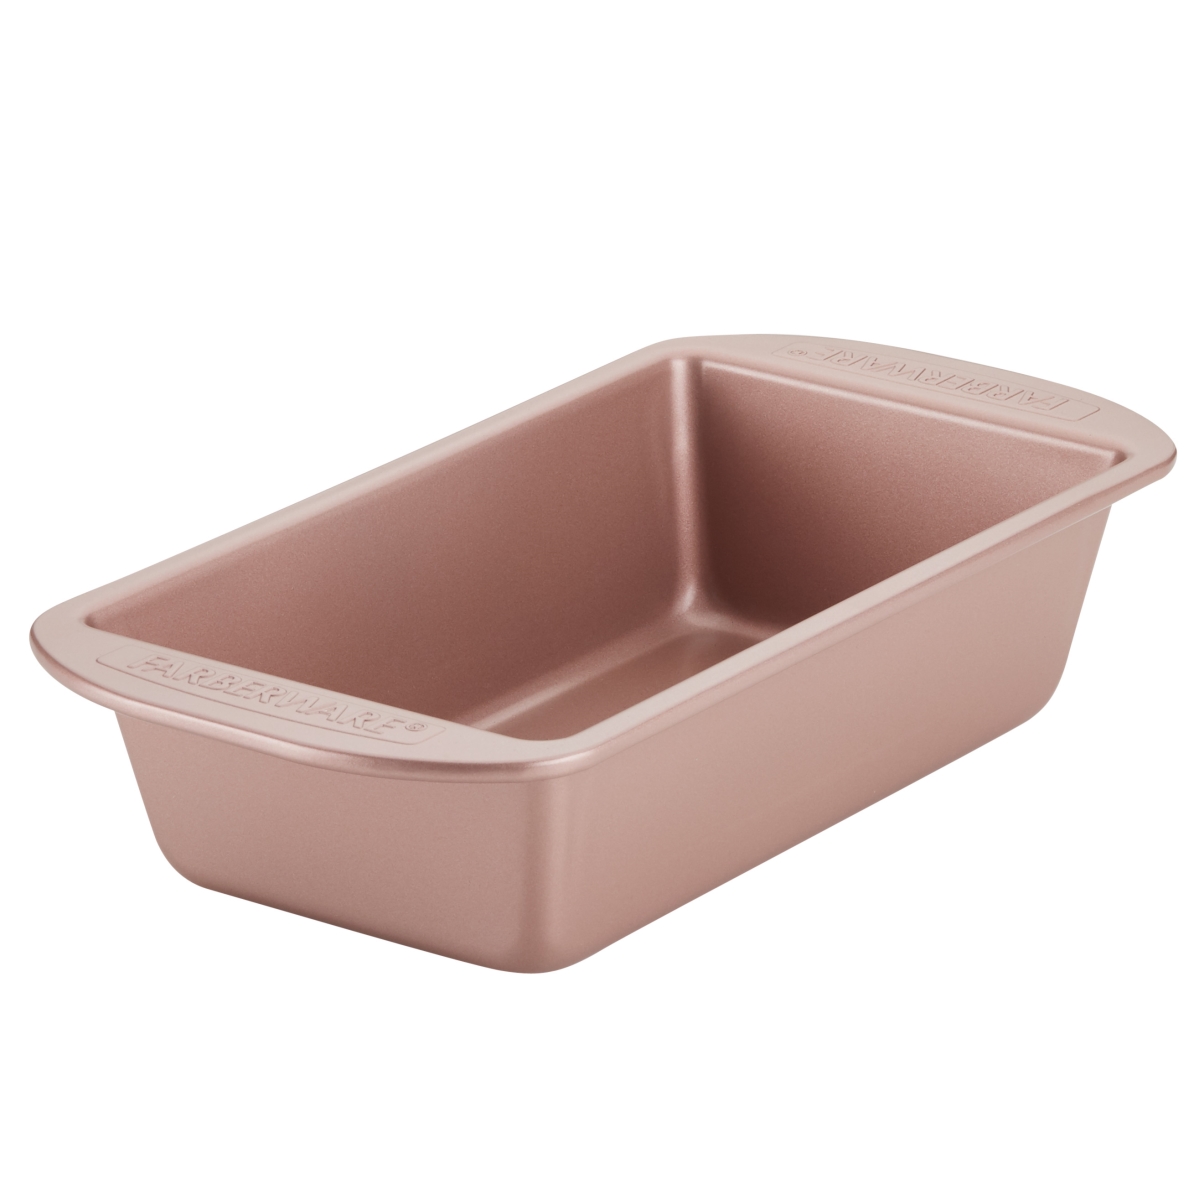 Picture of Farberware 47773 9 x 5 in. Nonstick Bakeware Loaf Pan - Rose Gold